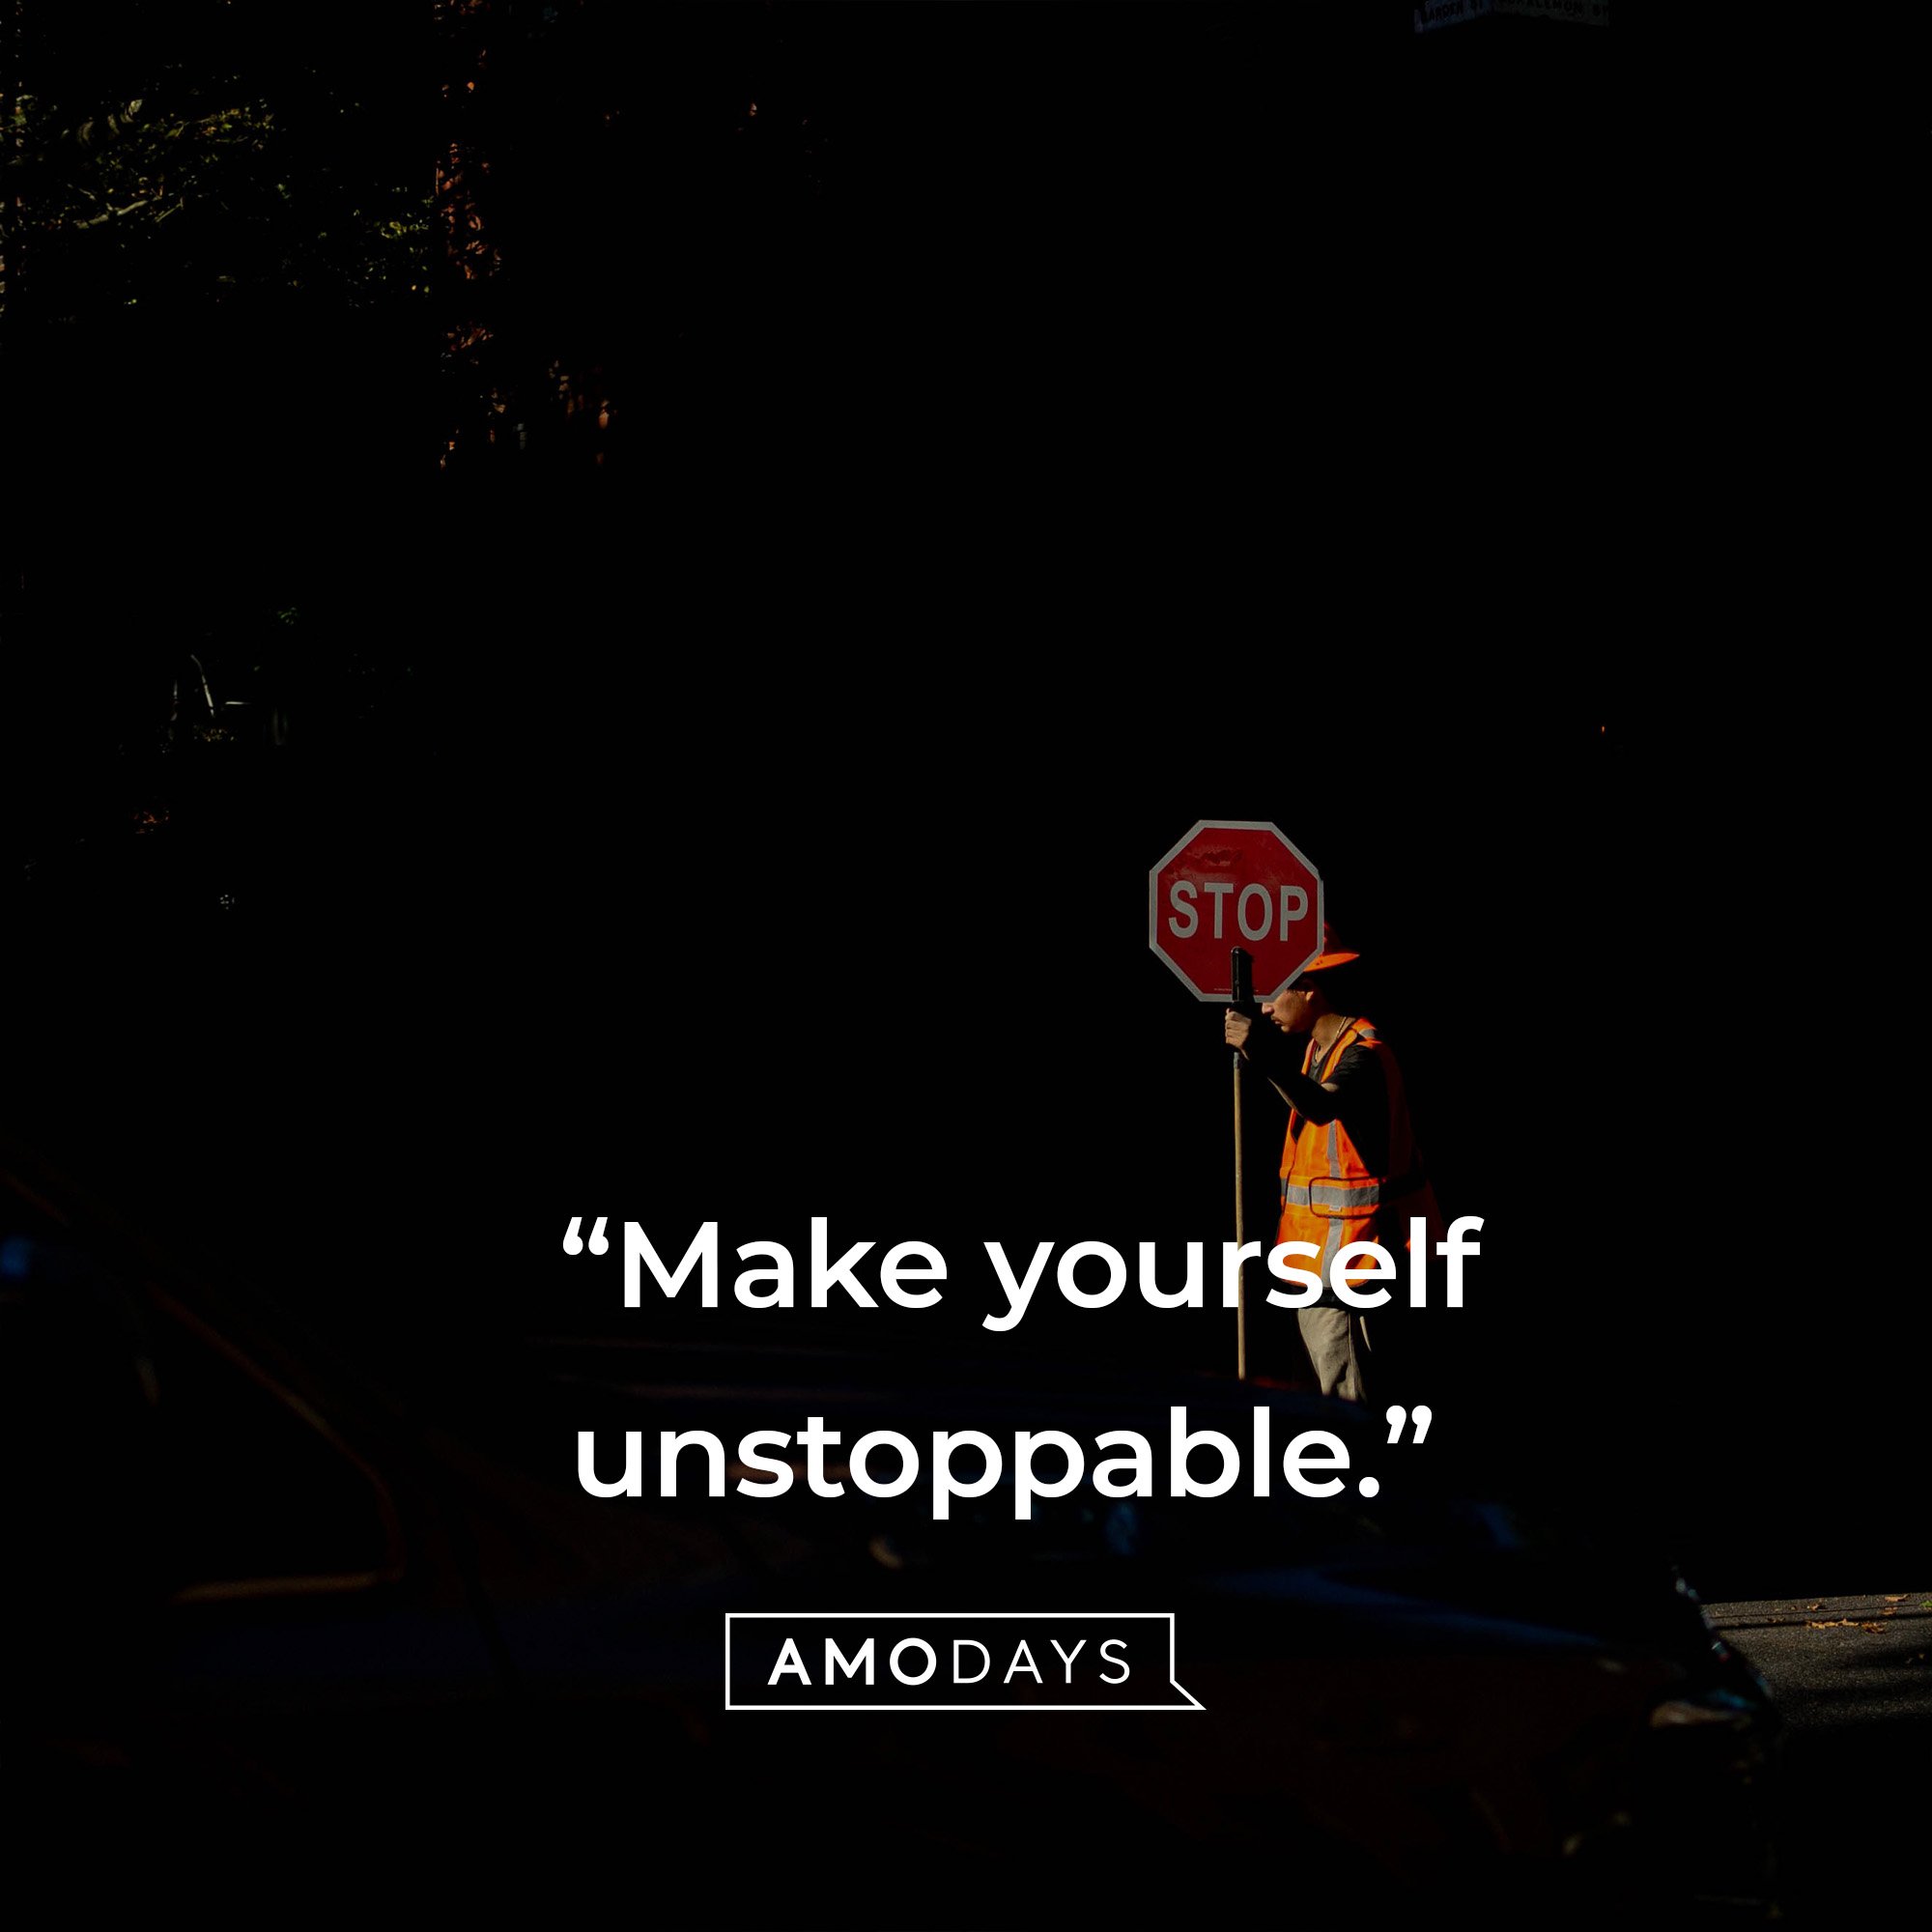 Nike’s quote: "Make yourself unstoppable." | Source: AmoDays